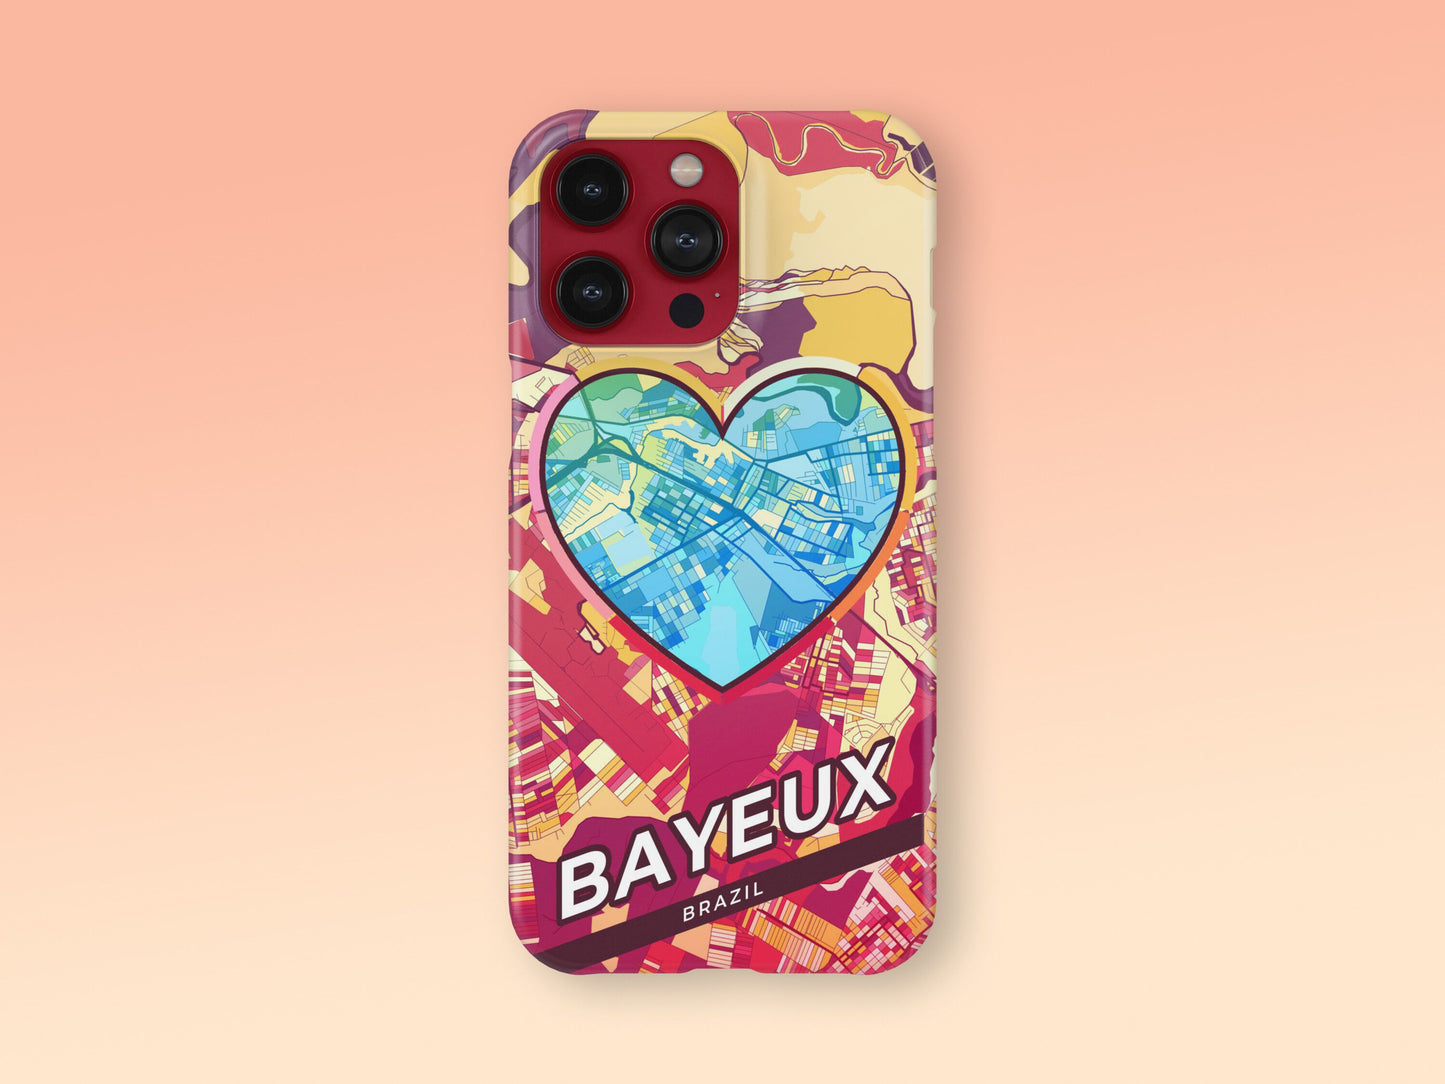 Bayeux Brazil slim phone case with colorful icon. Birthday, wedding or housewarming gift. Couple match cases. 2